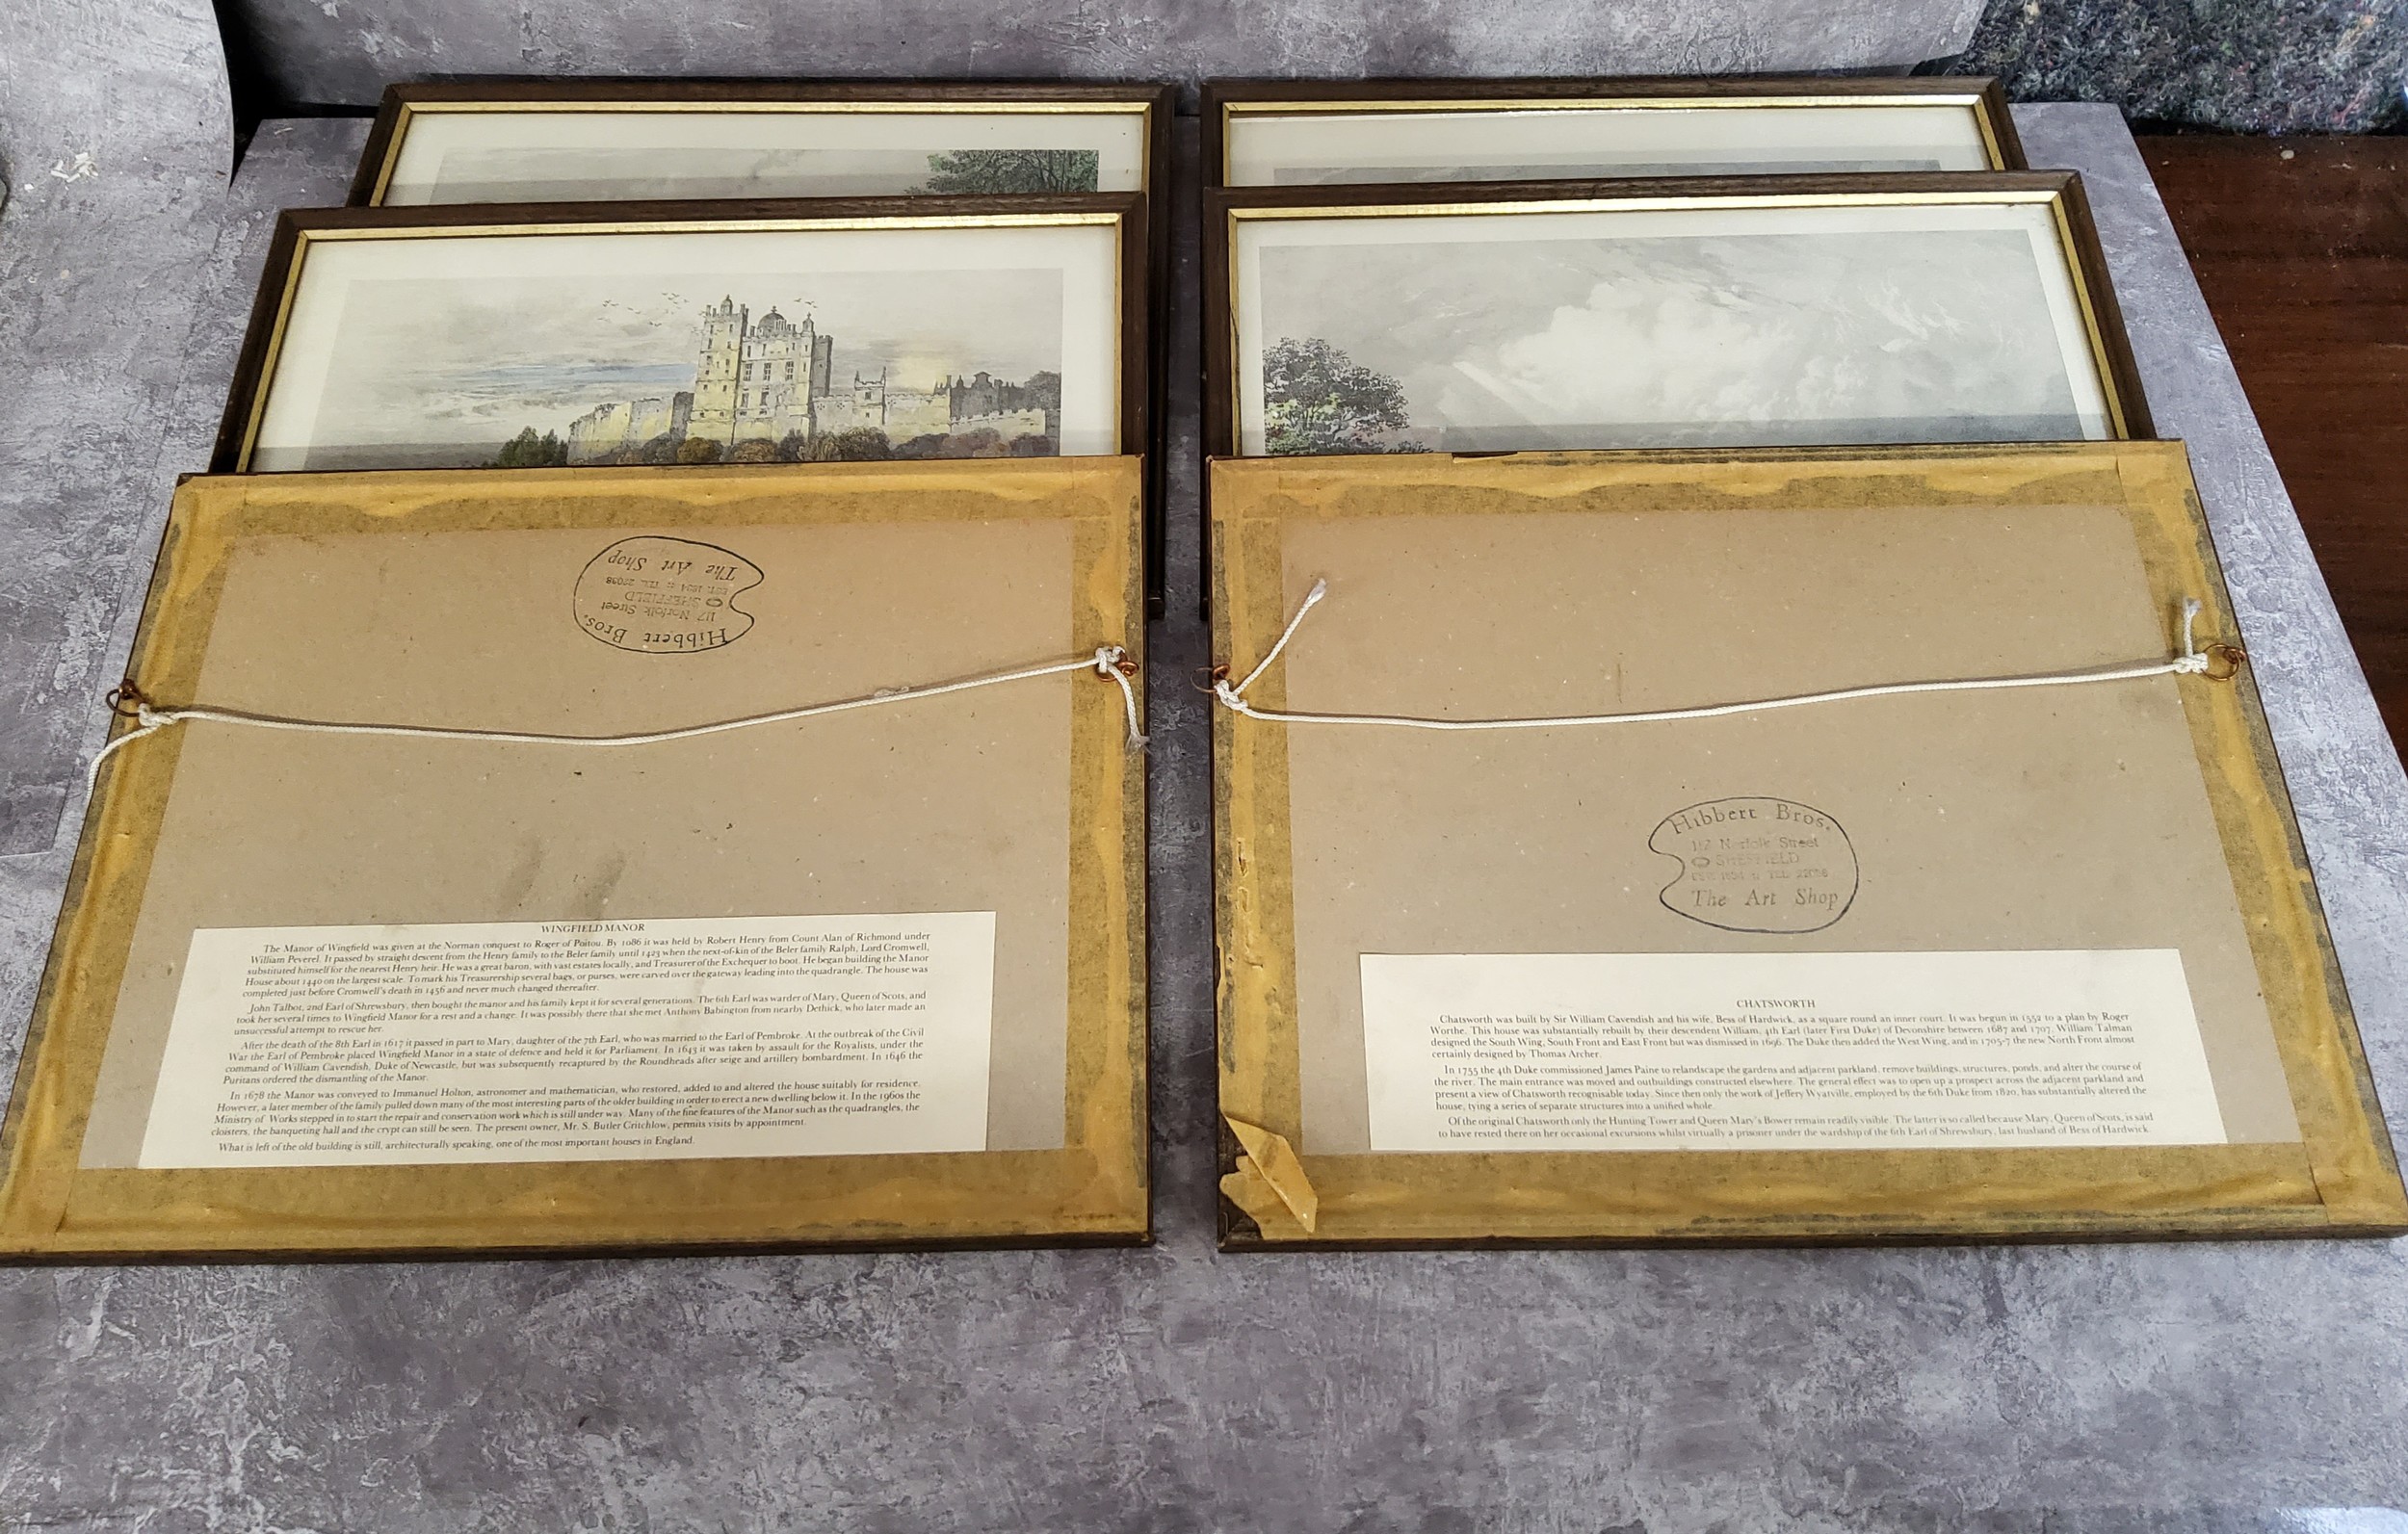 Six 19th century hand tinted lithographs of Derbyshire estates including Chatsworth House, - Image 2 of 4